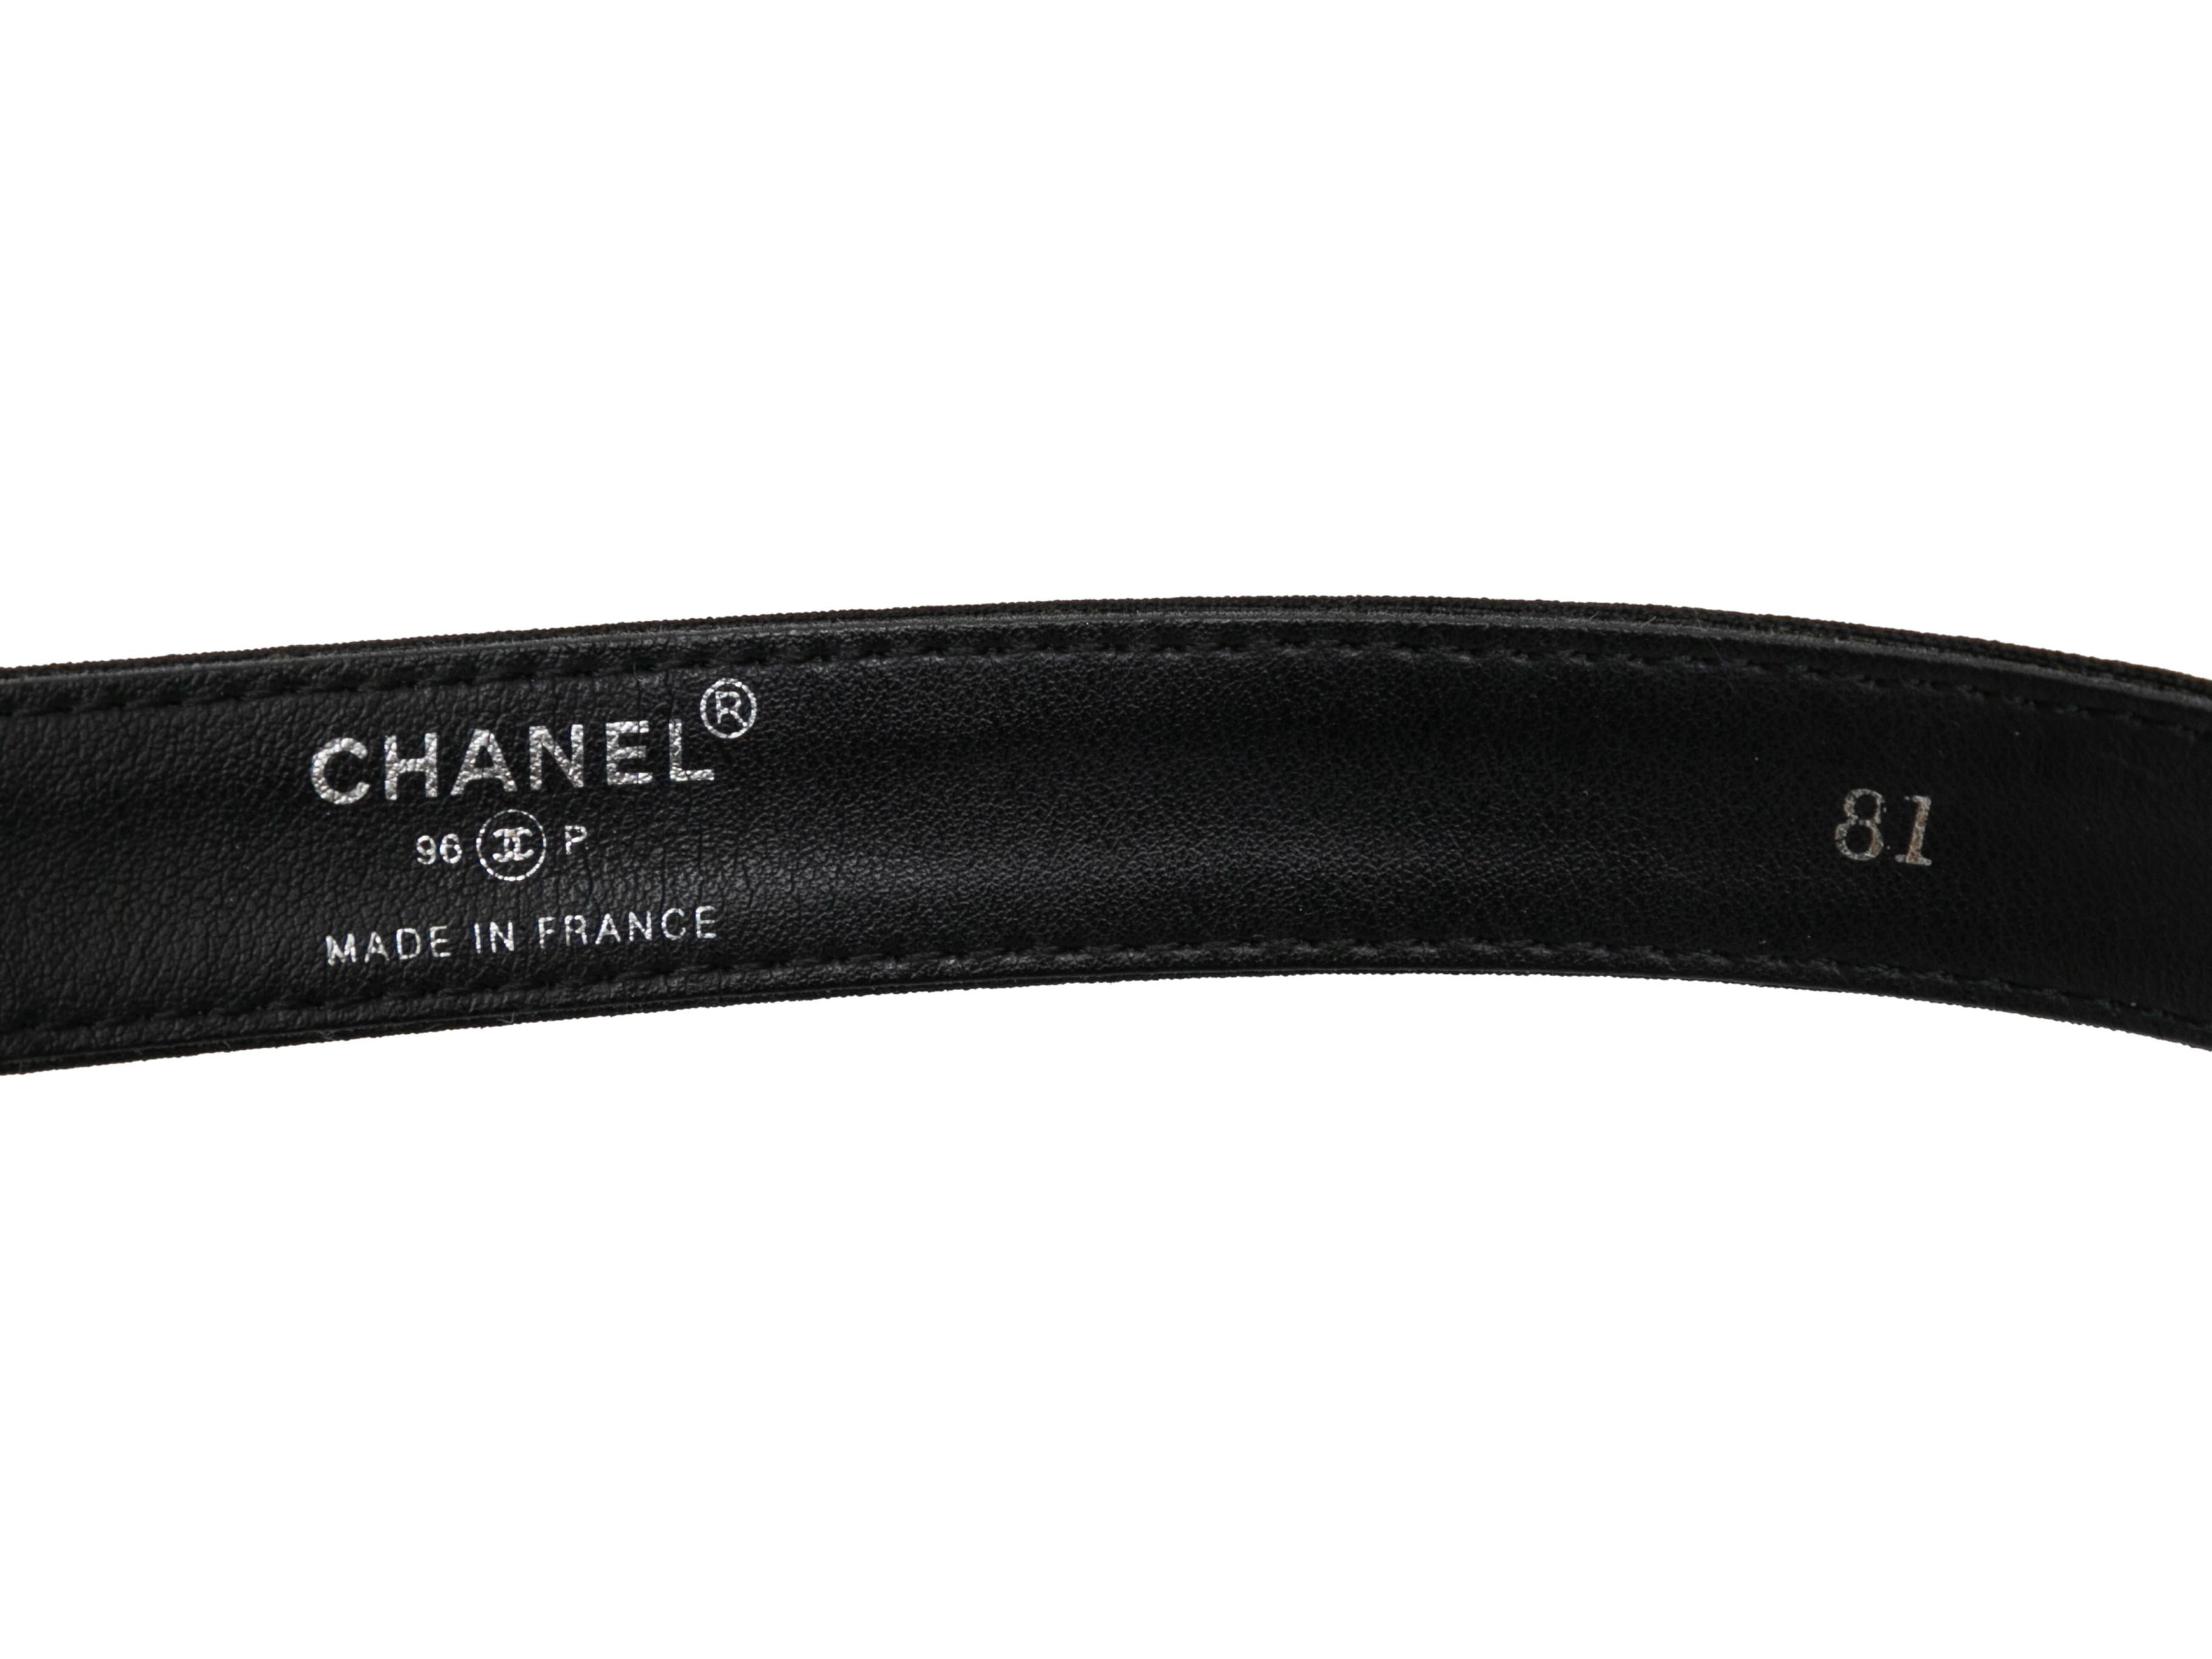 Vintage black nylon and leather belt by Chanel. From the Spring/Summer 1996 Collection. Silver-tone logo buckle clsoure. 1